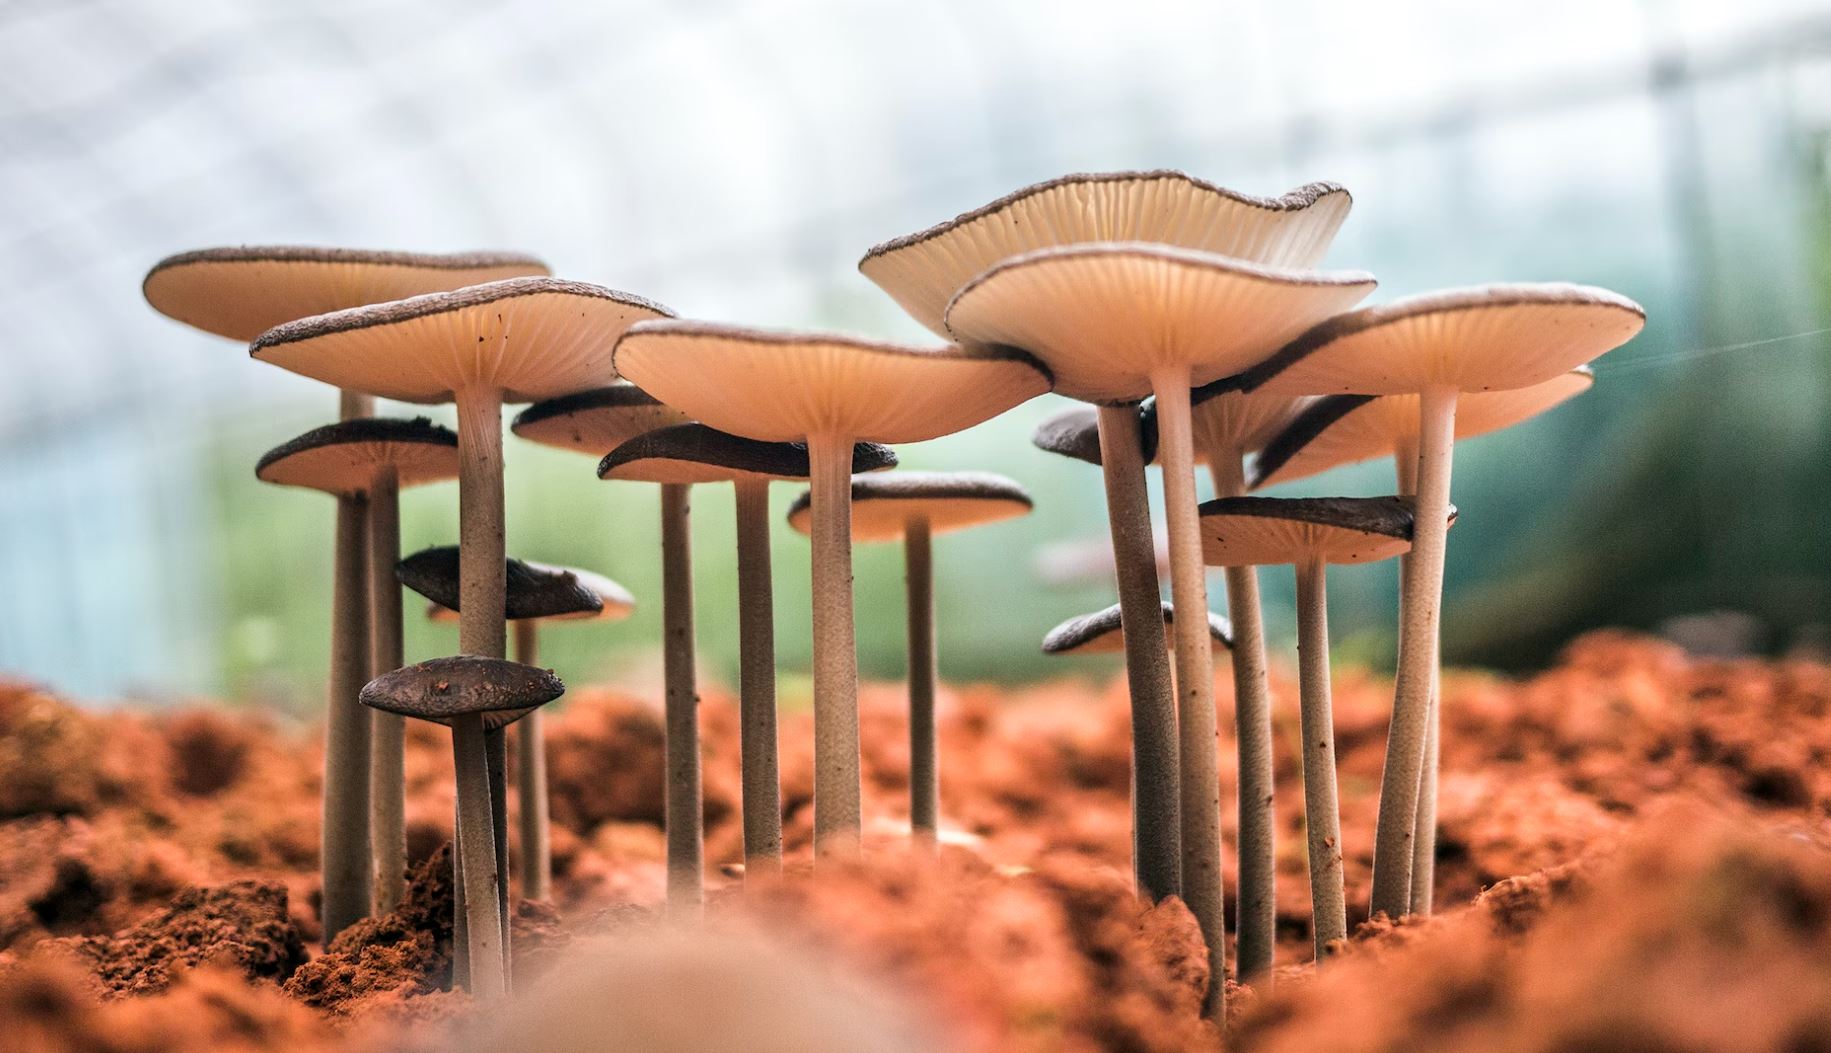 Advantages of Cultivating Mushrooms in a Greenhouse